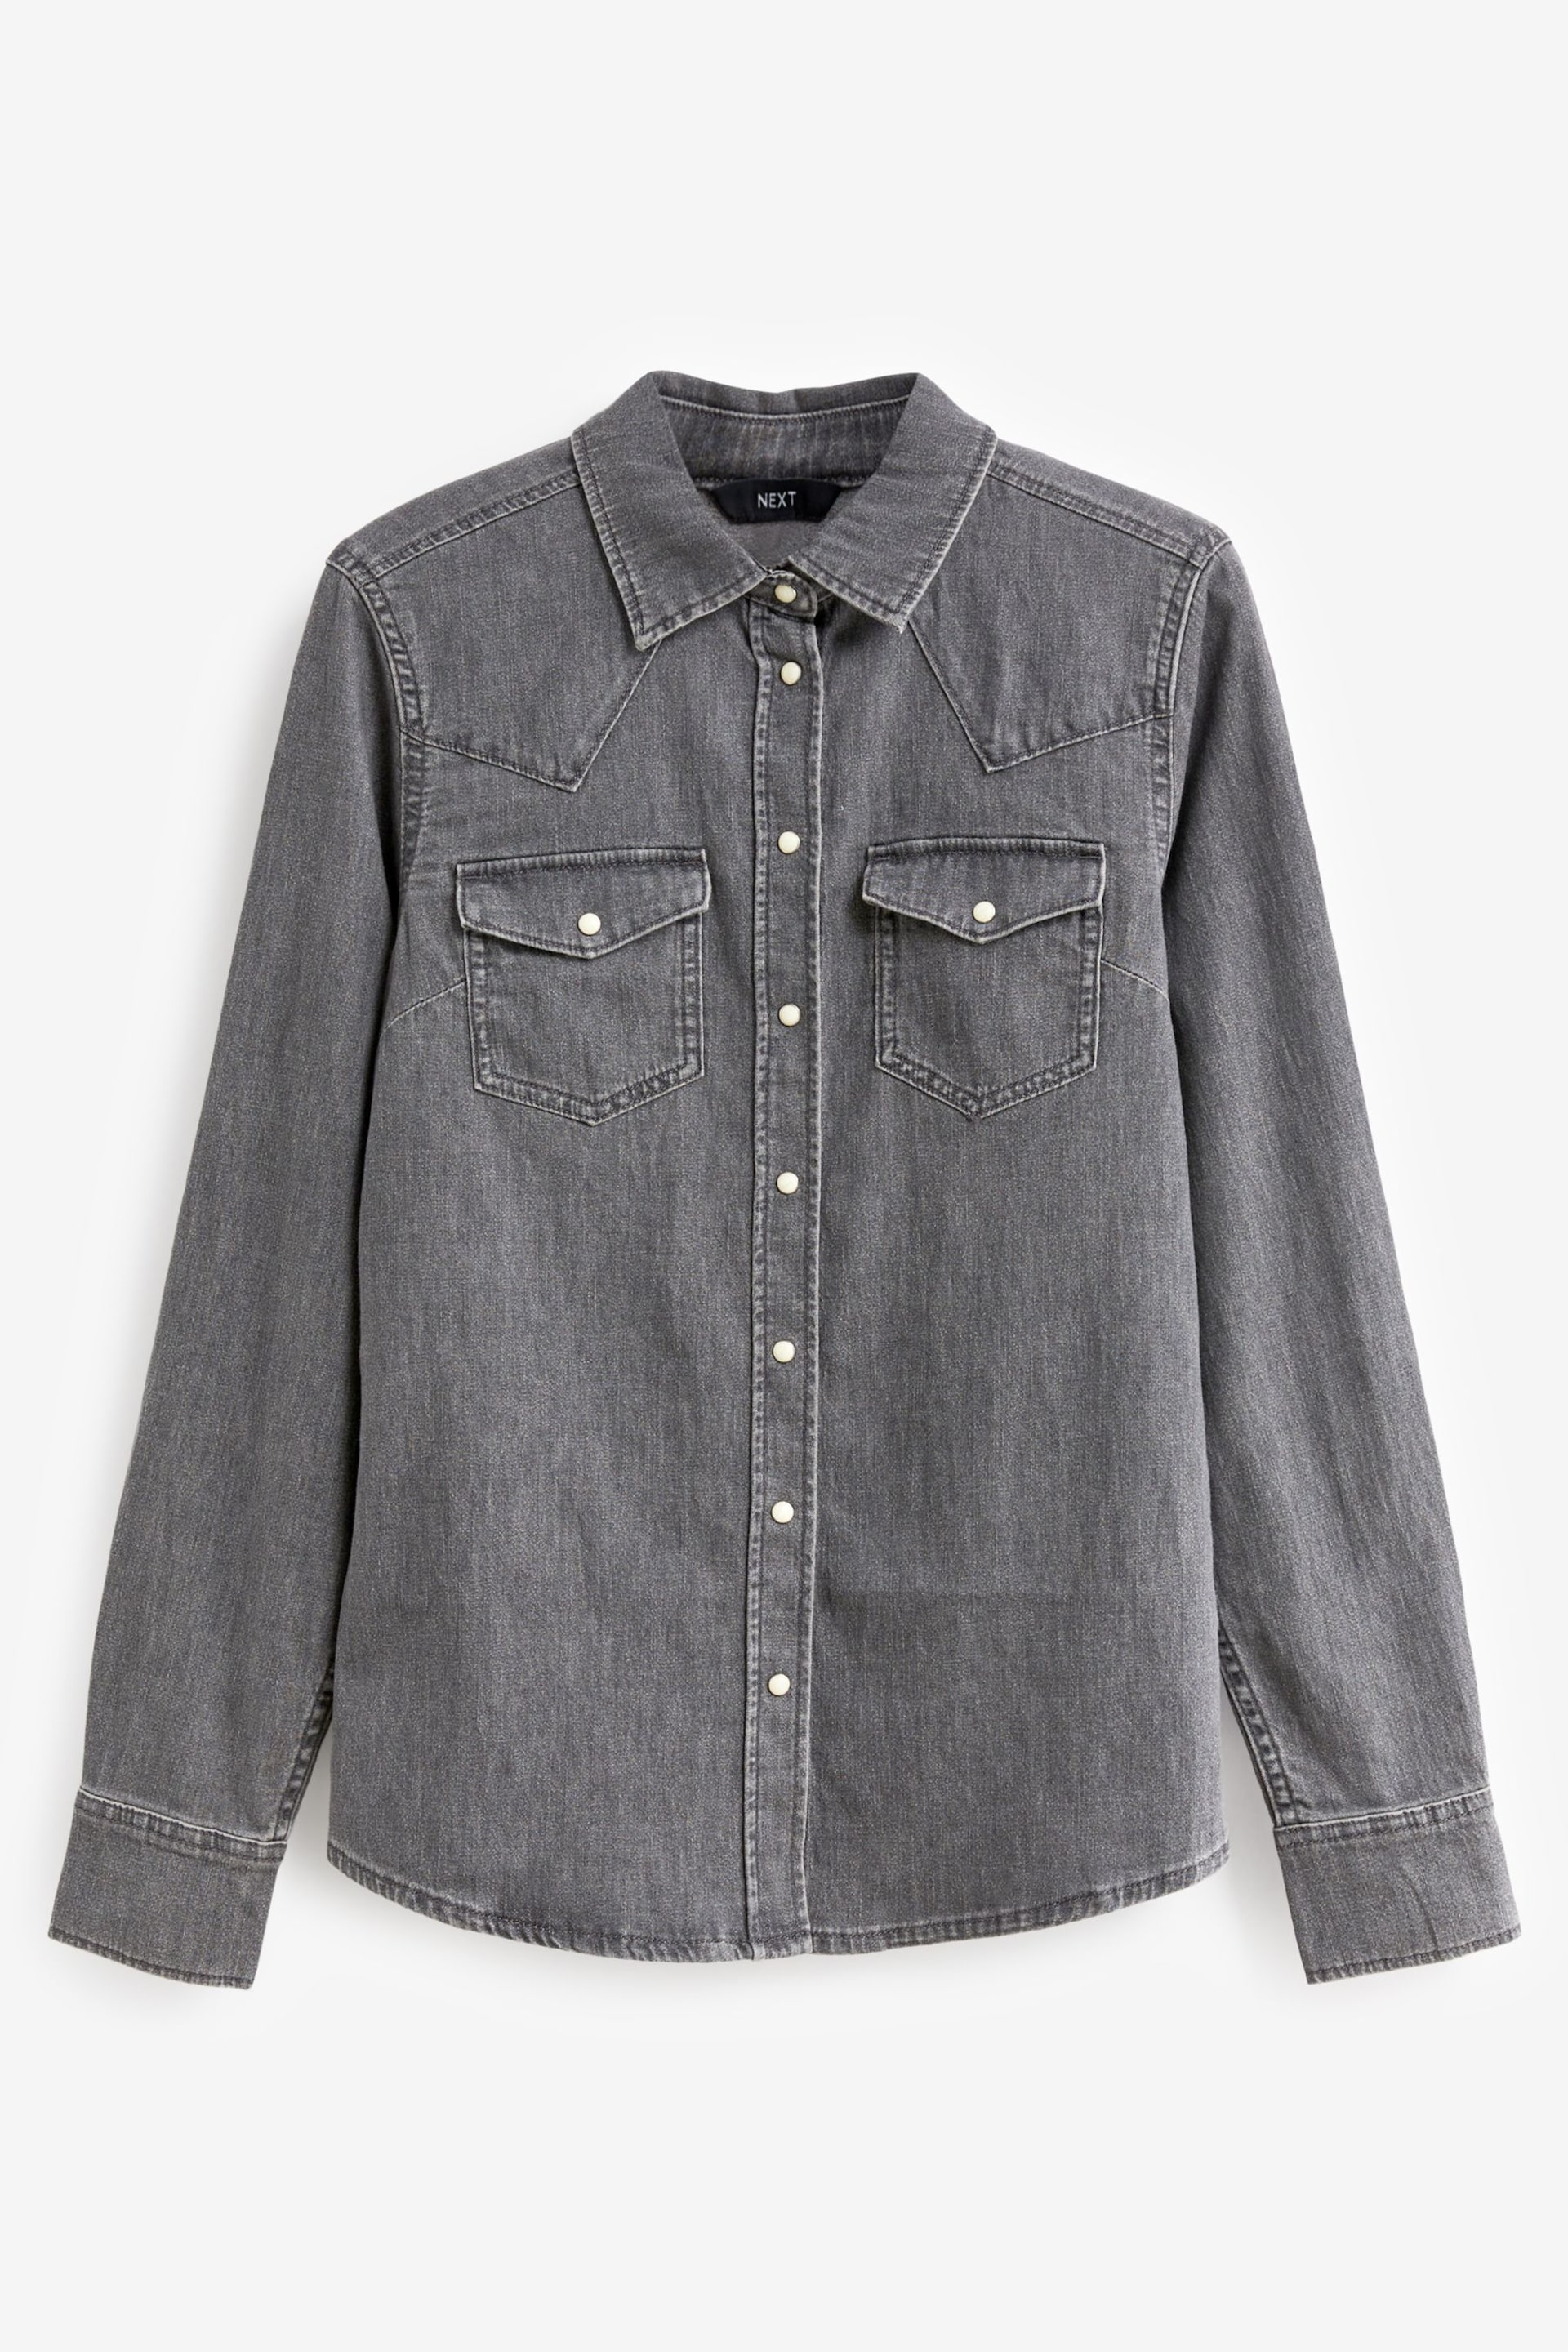 Washed Black Fitted Western Denim Shirt - Image 5 of 6